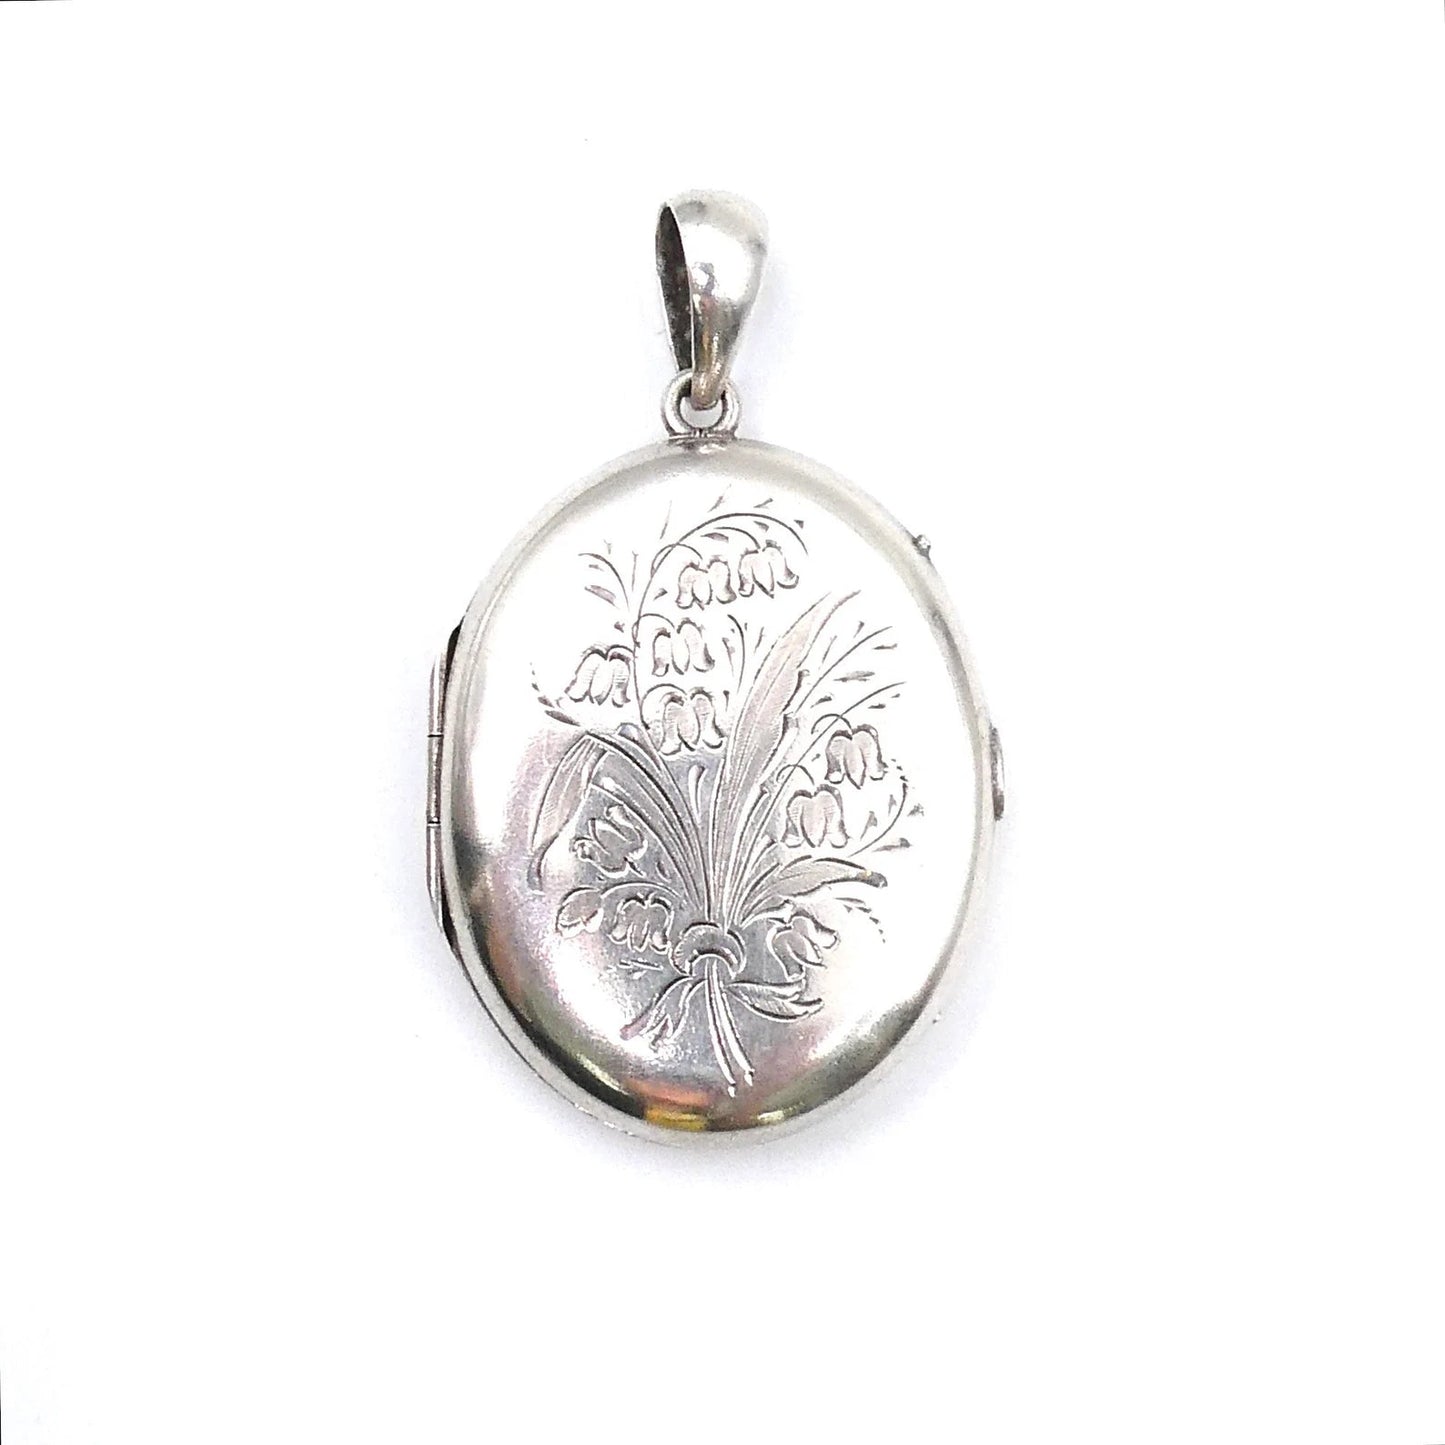 Vintage silver locket with an etched floral and leaf bouquet design. - Collected